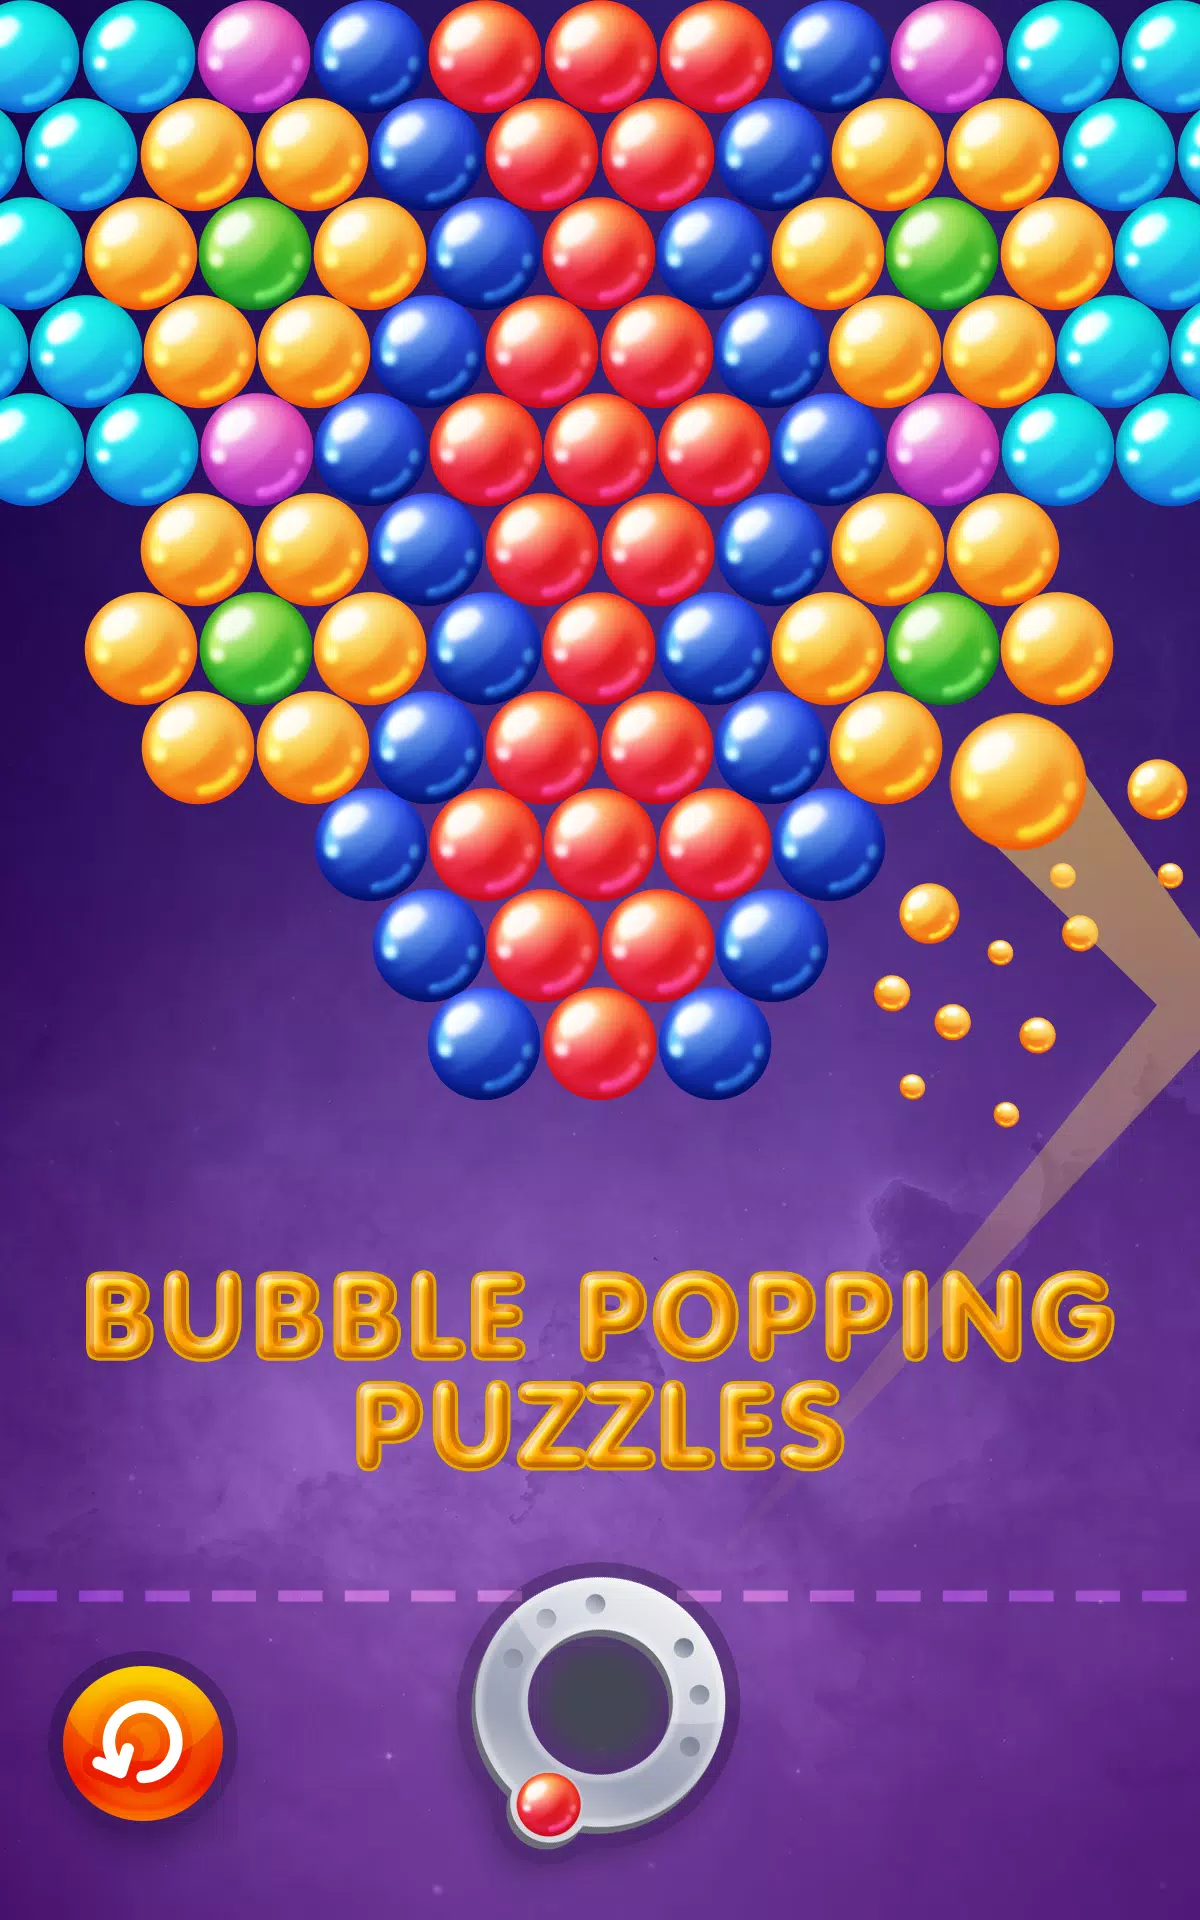 Download Bubble Shooter Classic Game APK